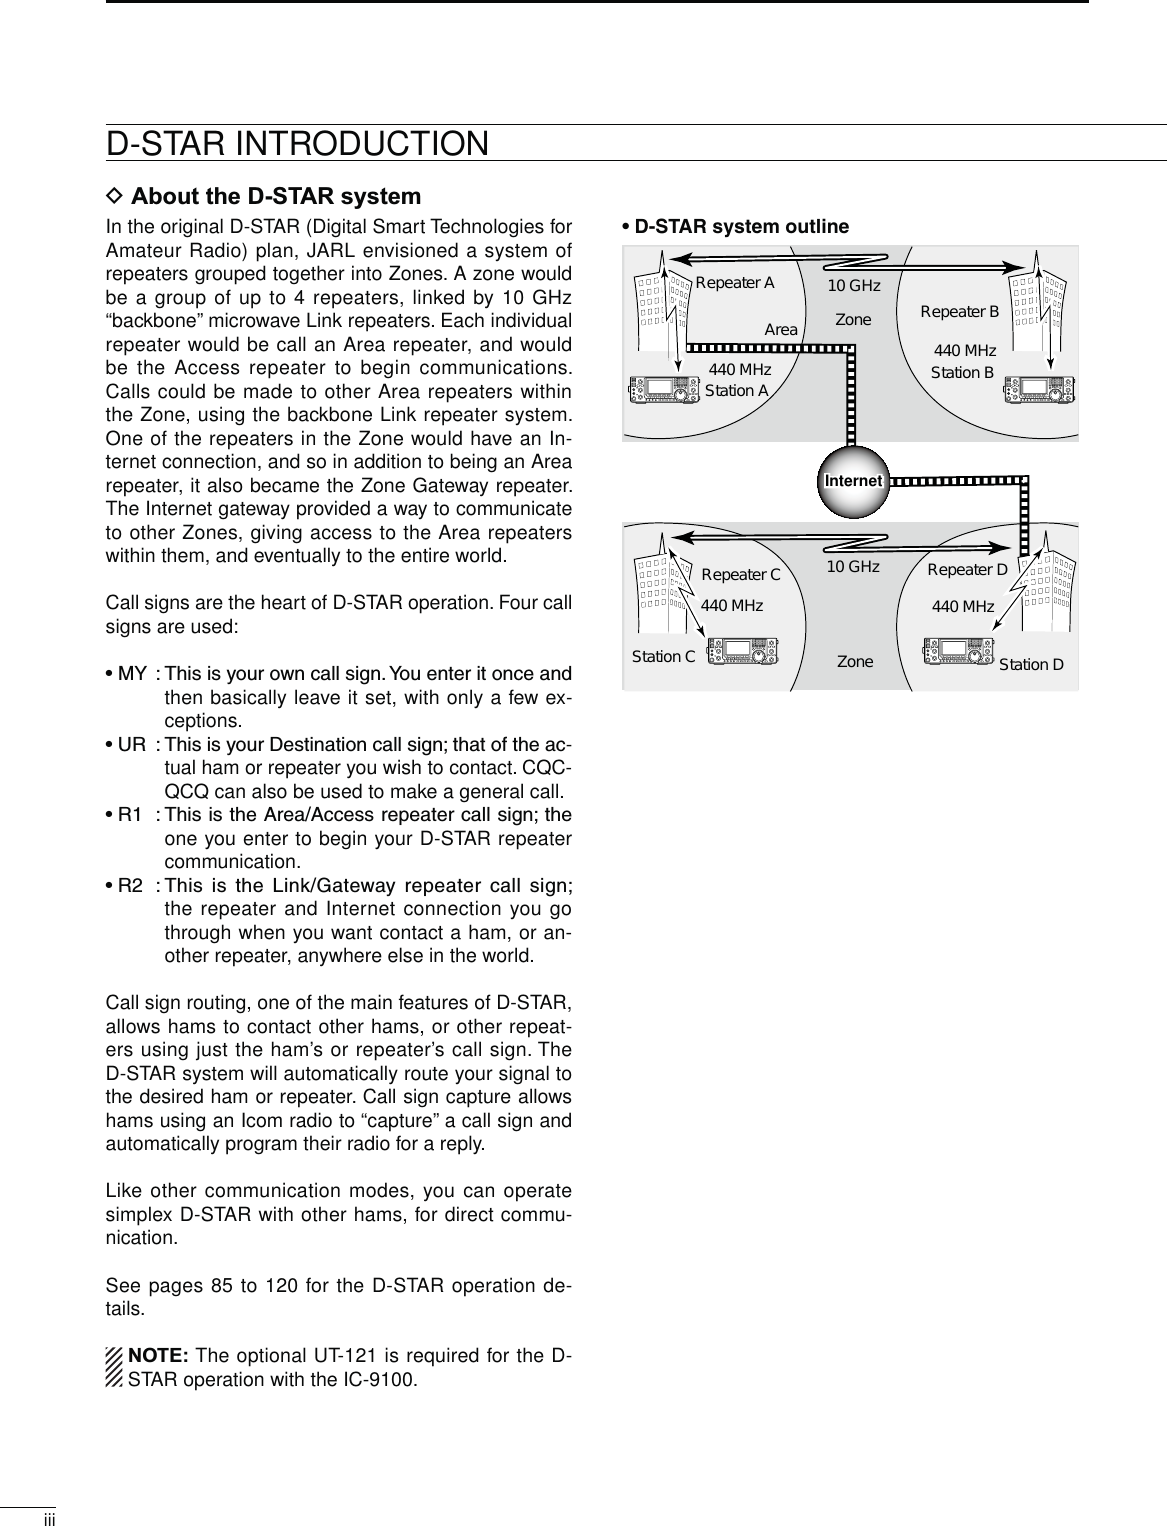 iiiD About the D-STAR systemIn the original D-STAR (Digital Smart Technologies for Amateur Radio) plan, JARL envisioned a system of repeaters grouped together into Zones. A zone would be a group of up to 4 repeaters, linked by 10 GHz “backbone” microwave Link repeaters. Each individual repeater would be call an Area repeater, and would be the Access repeater to begin communications. Calls could be made to other Area repeaters within the Zone, using the backbone Link repeater system. One of the repeaters in the Zone would have an In-ternet connection, and so in addition to being an Area repeater, it also became the Zone Gateway repeater. The Internet gateway provided a way to communicate to other Zones, giving access to the Area repeaters within them, and eventually to the entire world.Call signs are the heart of D-STAR operation. Four call signs are used:s-9 4HISISYOUROWNCALLSIGN9OUENTERITONCEANDthen basically leave it set, with only a few ex-ceptions.s52 4HISISYOUR$ESTINATIONCALLSIGNTHATOFTHEAC-tual ham or repeater you wish to contact. CQC-QCQ can also be used to make a general call.s2 4HISISTHE!REA!CCESSREPEATERCALLSIGNTHEone you enter to begin your D-STAR repeater communication.s2 4HIS IS THE ,INK&apos;ATEWAY REPEATER CALL SIGNthe repeater and Internet connection you go through when you want contact a ham, or an-other repeater, anywhere else in the world.Call sign routing, one of the main features of D-STAR, allows hams to contact other hams, or other repeat-ers using just the ham’s or repeater’s call sign. The D-STAR system will automatically route your signal to the desired ham or repeater. Call sign capture allows hams using an Icom radio to “capture” a call sign and automatically program their radio for a reply.Like other communication modes, you can operate simplex D-STAR with other hams, for direct commu-nication.See pages 85 to 120 for the D-STAR operation de-tails.NOTE: The optional UT-121 is required for the D-STAR operation with the IC-9100.s$34!2SYSTEMOUTLINEStation AStation C  Station DRepeater ARepeater D440 MHz440 MHzRepeater C10 GHzZoneZoneAreaStation BRepeater B10 GHz440 MHz440 MHzInternetInternetD-STAR INTRODUCTION